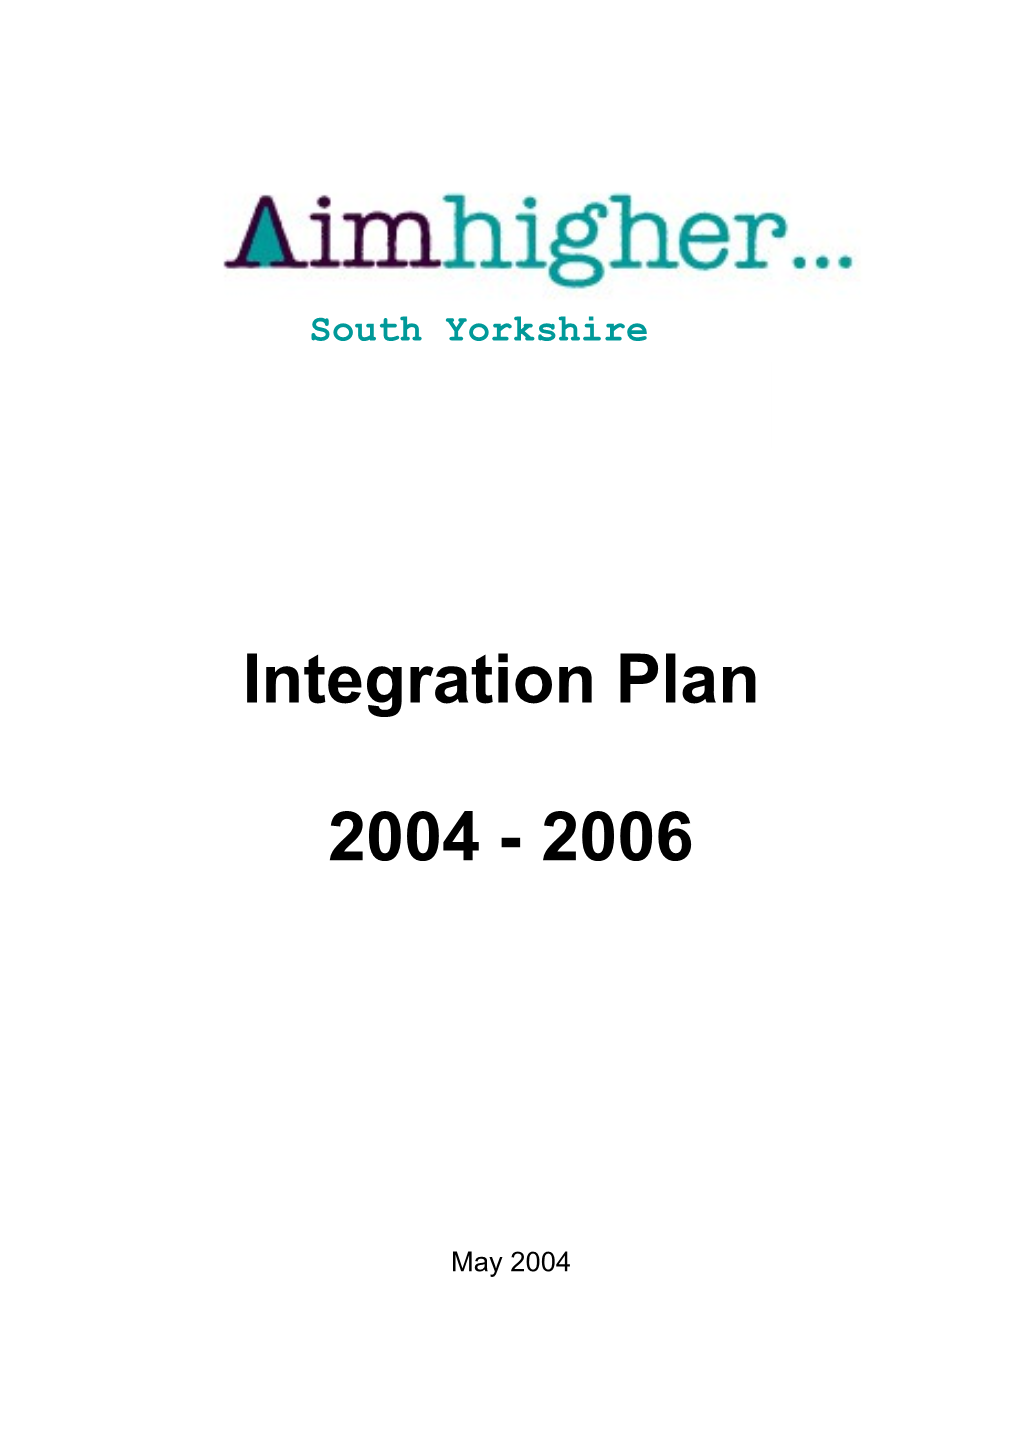 Aimhigher South Yorkshire Integration Plan 2004-06